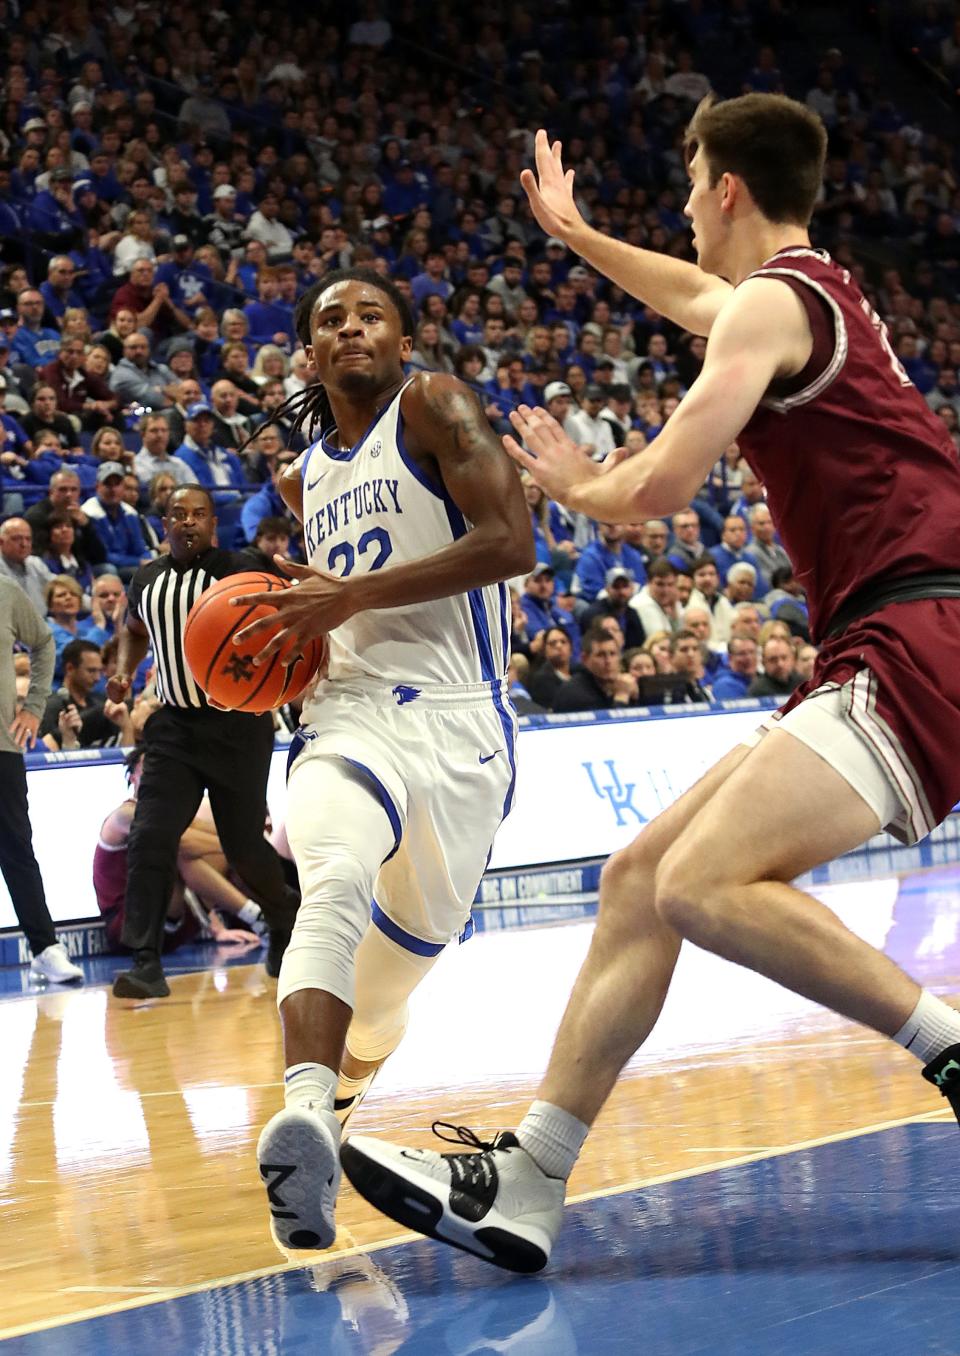 Kentucky’s Cason Wallace gets fouled as he goes for a shot against Bellarmine’s Langdon Hatton.Nov. 29, 2022